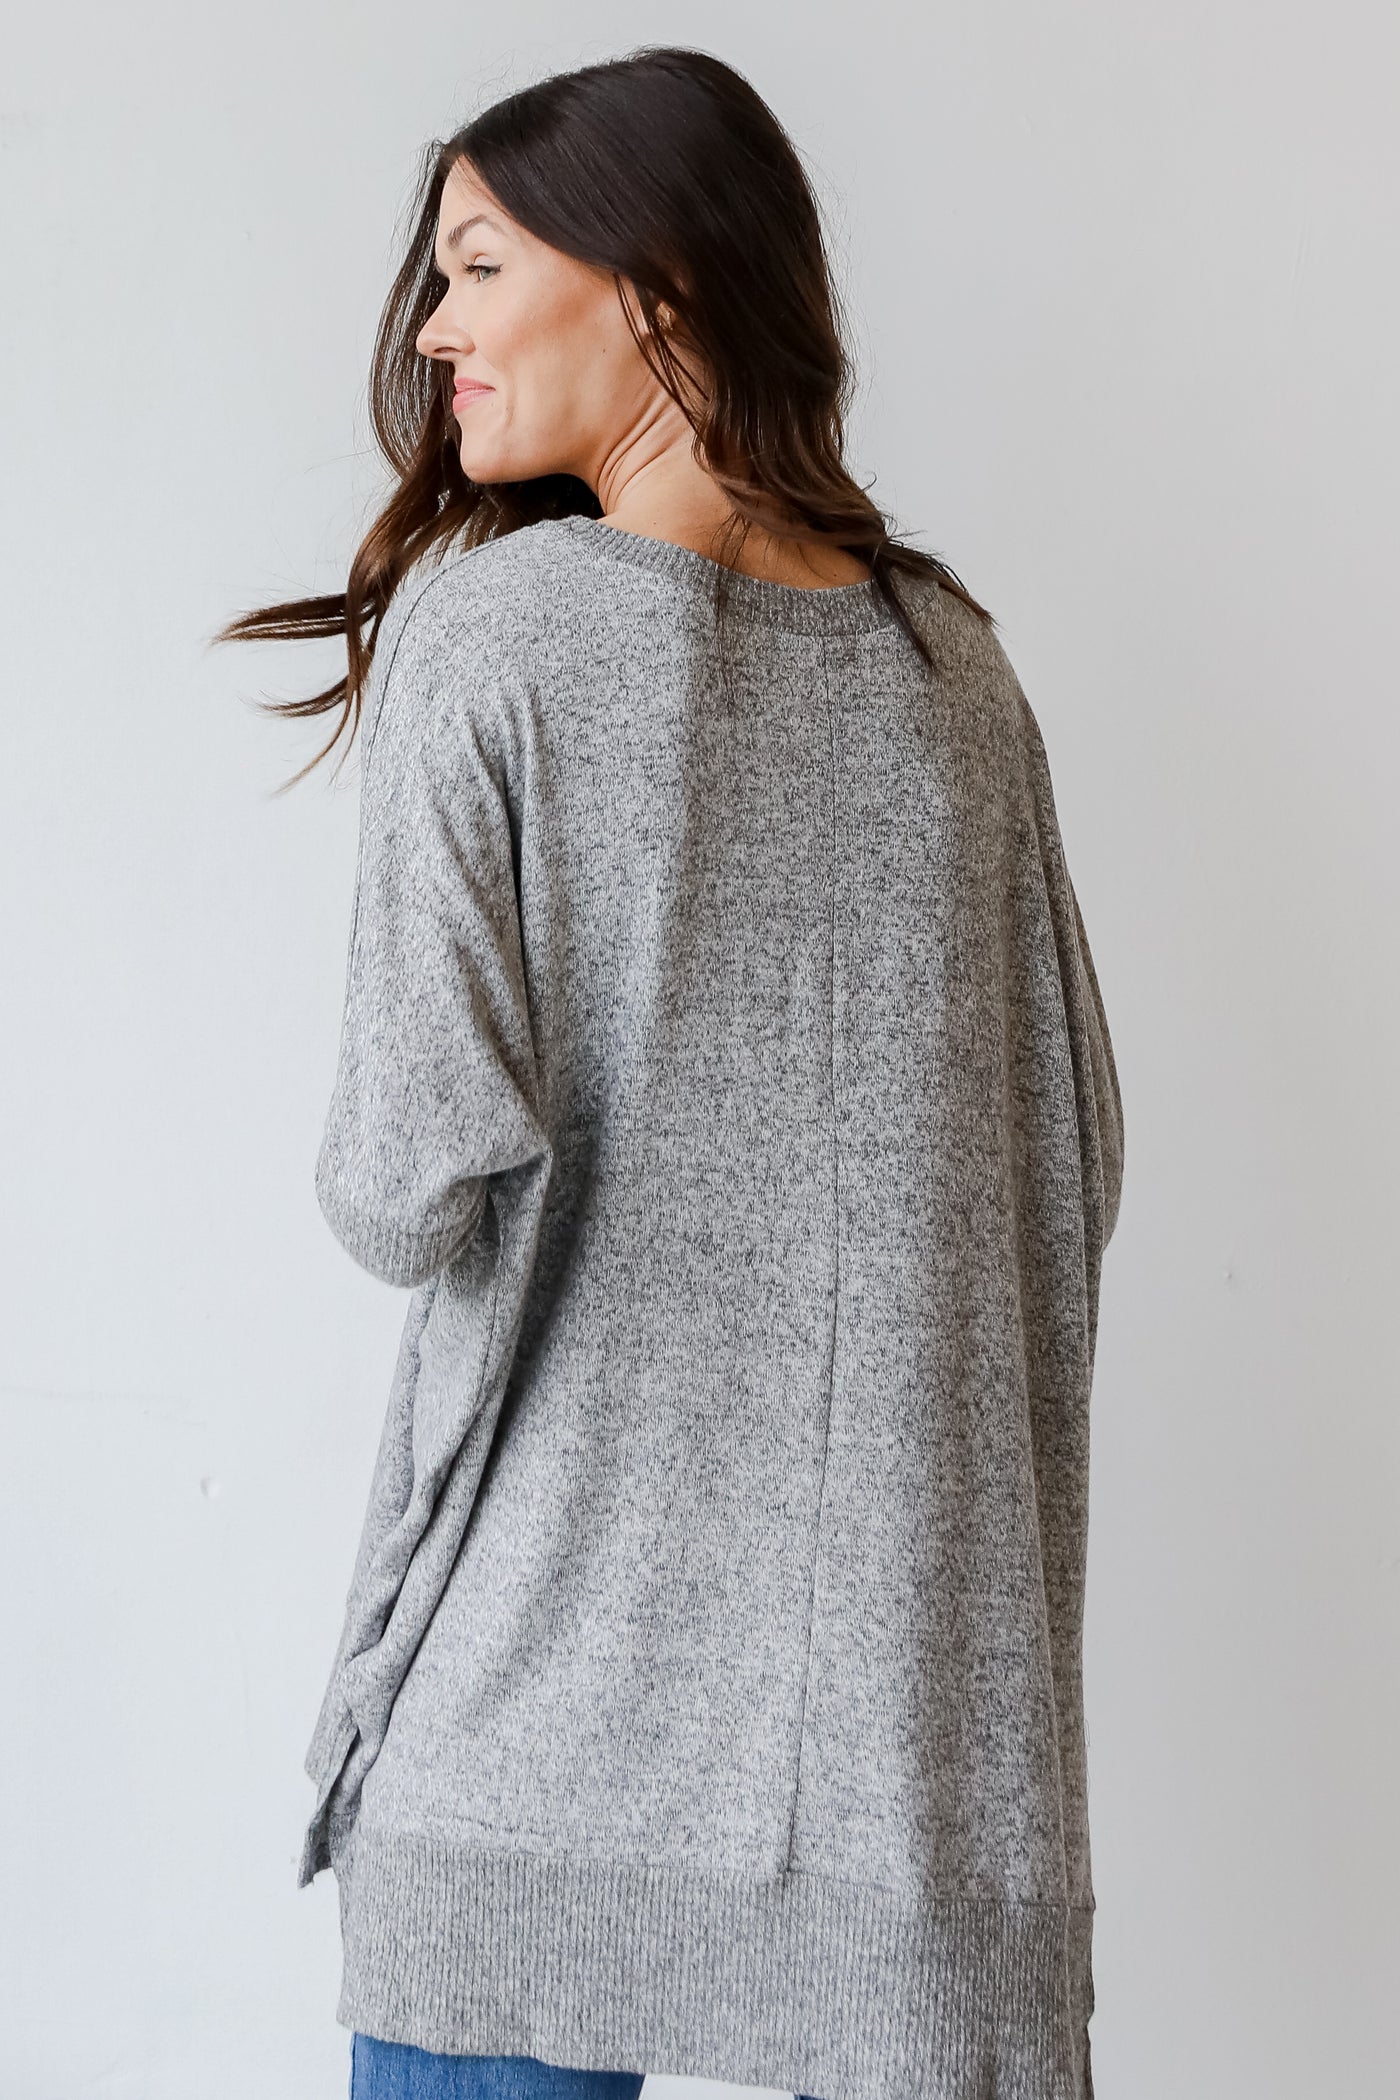 Brushed Knit Top in heather grey back view